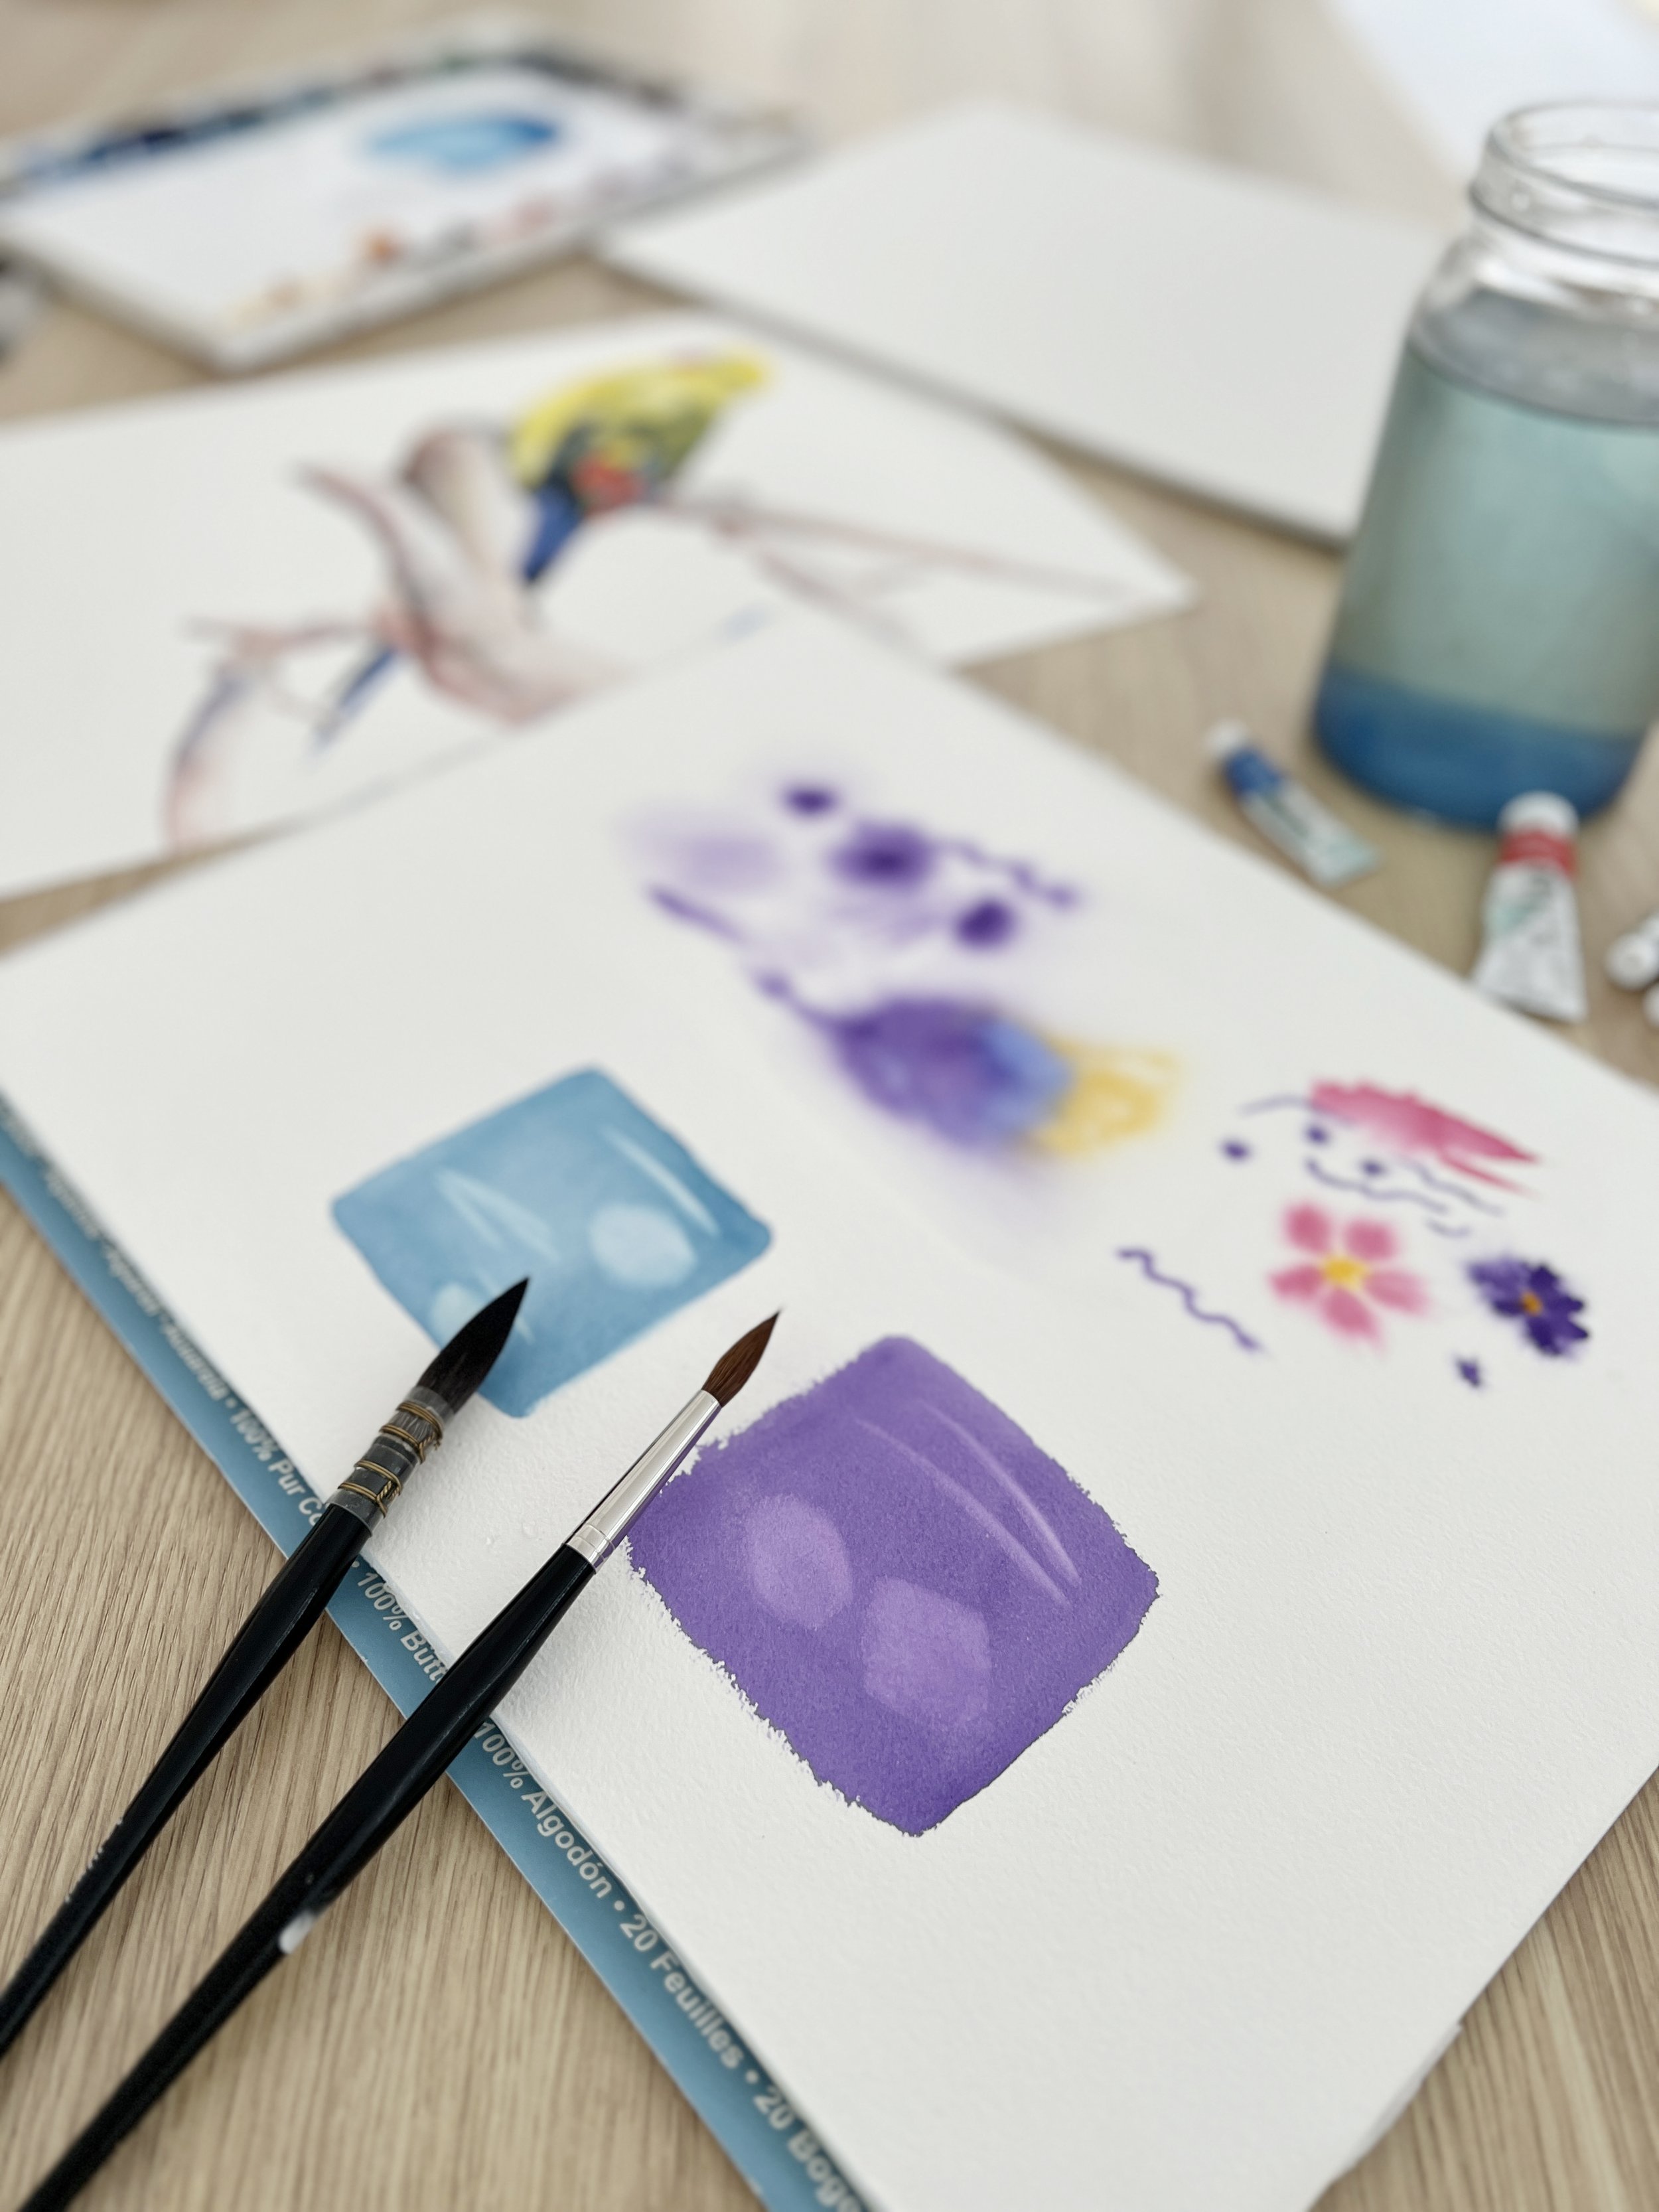 What is a watercolor paper block? 